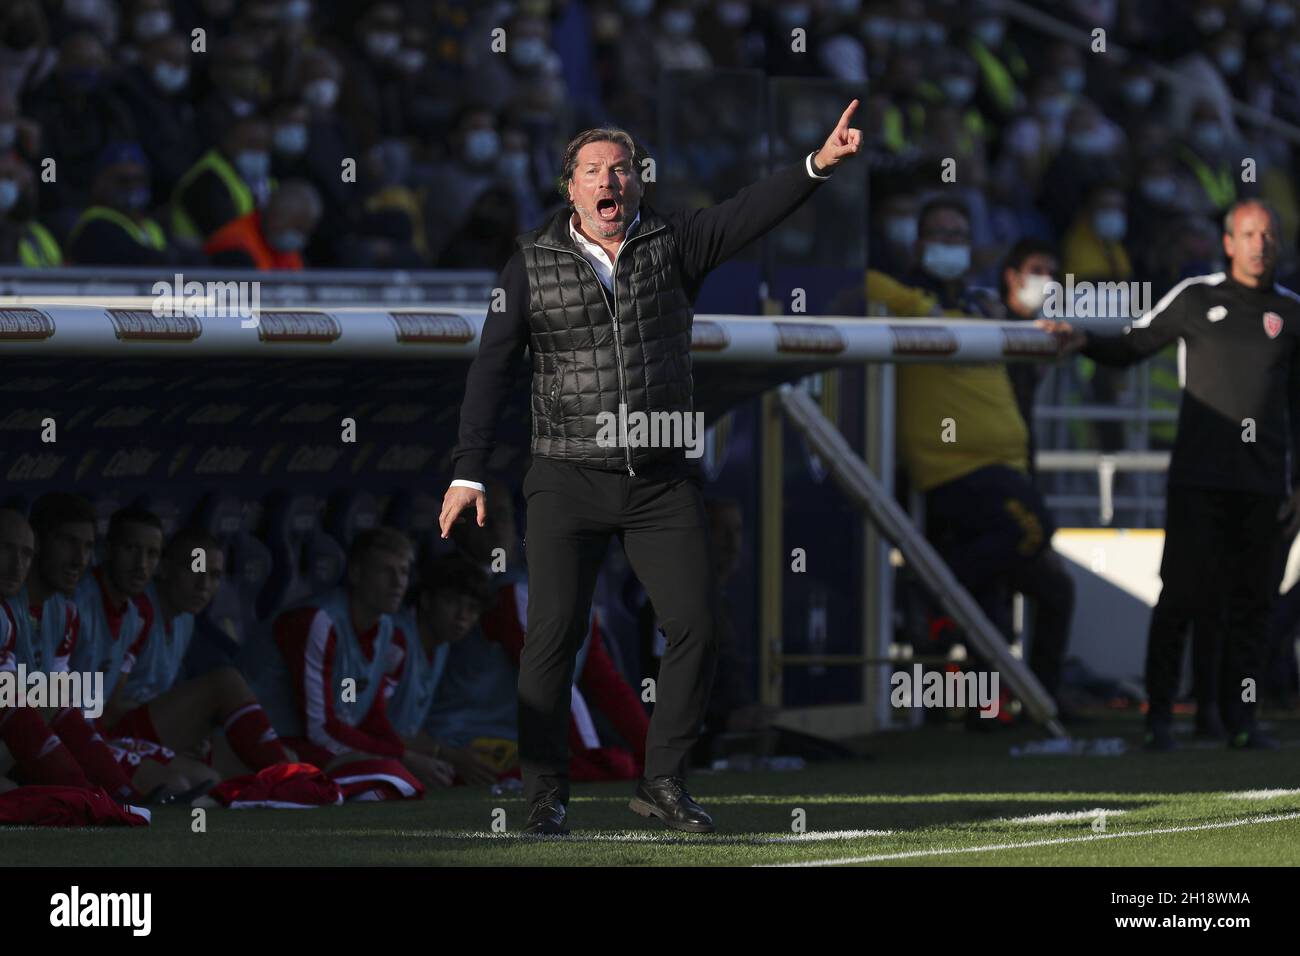 Parma, Italy. 17th Oct, 2021. Giovanni Stroppa (Monza) during Parma Calcio vs AC Monza, Italian Football Championship League BKT in Parma, Italy, October 17 2021 Credit: Independent Photo Agency/Alamy Live News Stock Photo